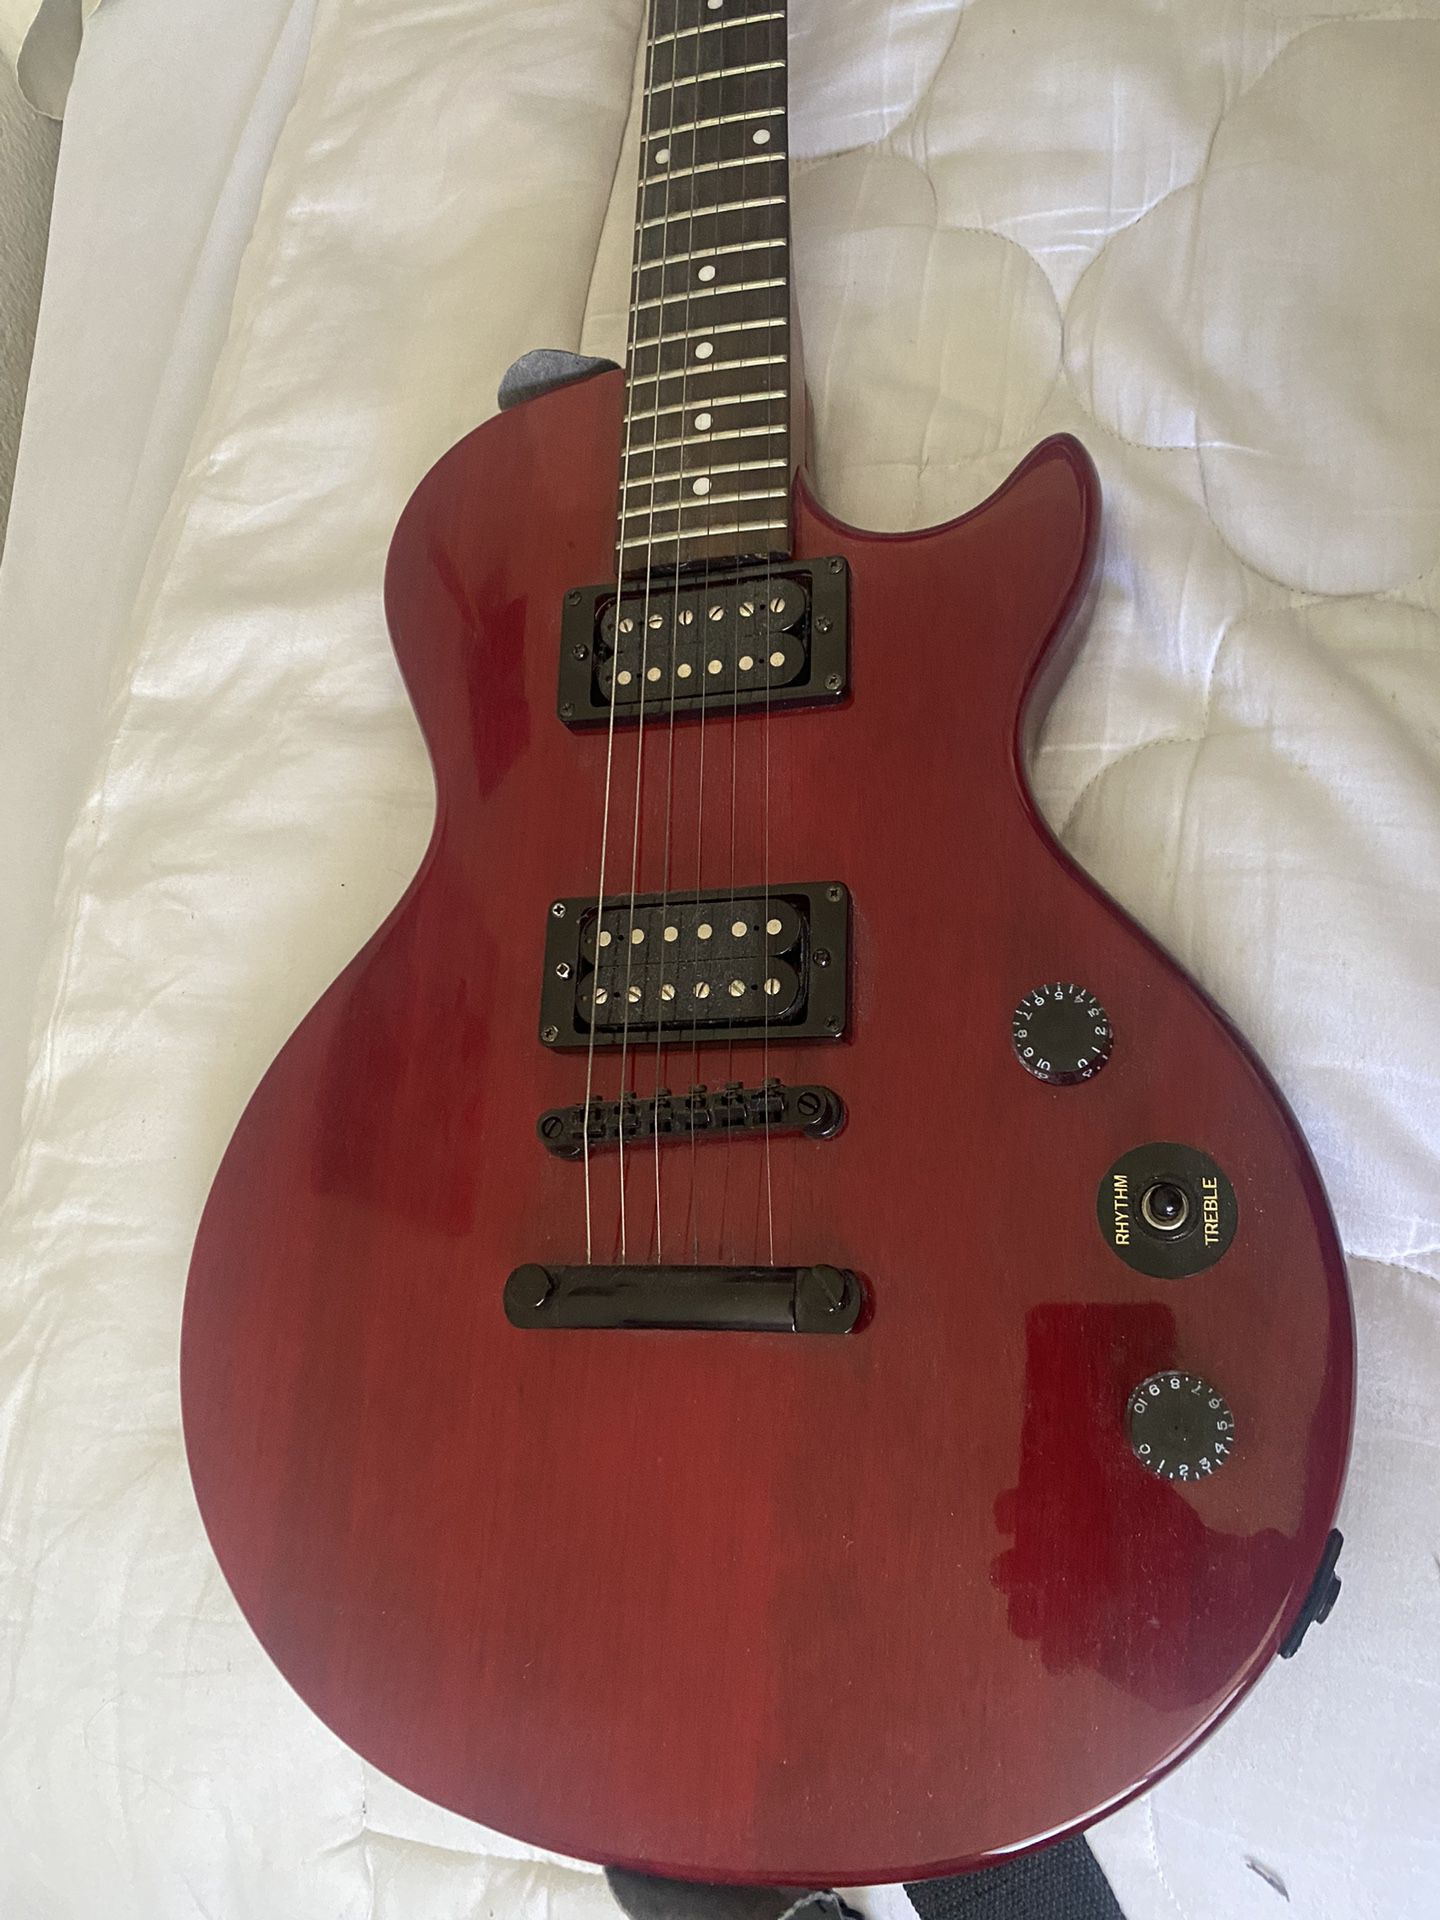 Epiphone Special Model II Wine Red Electric Guitar 